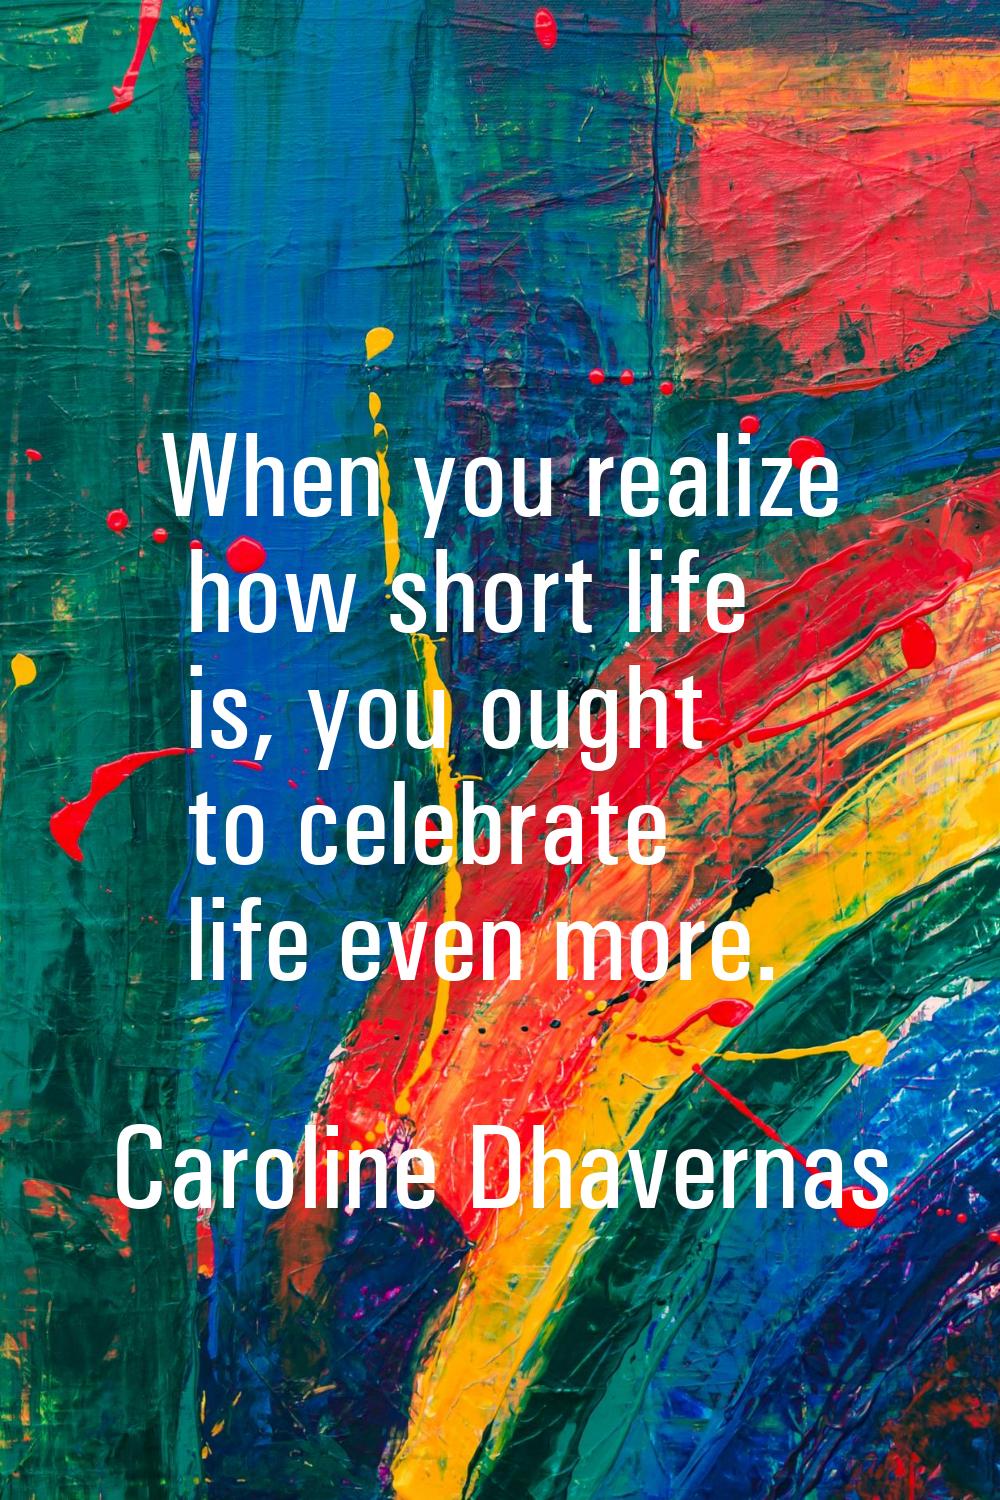 When you realize how short life is, you ought to celebrate life even more.